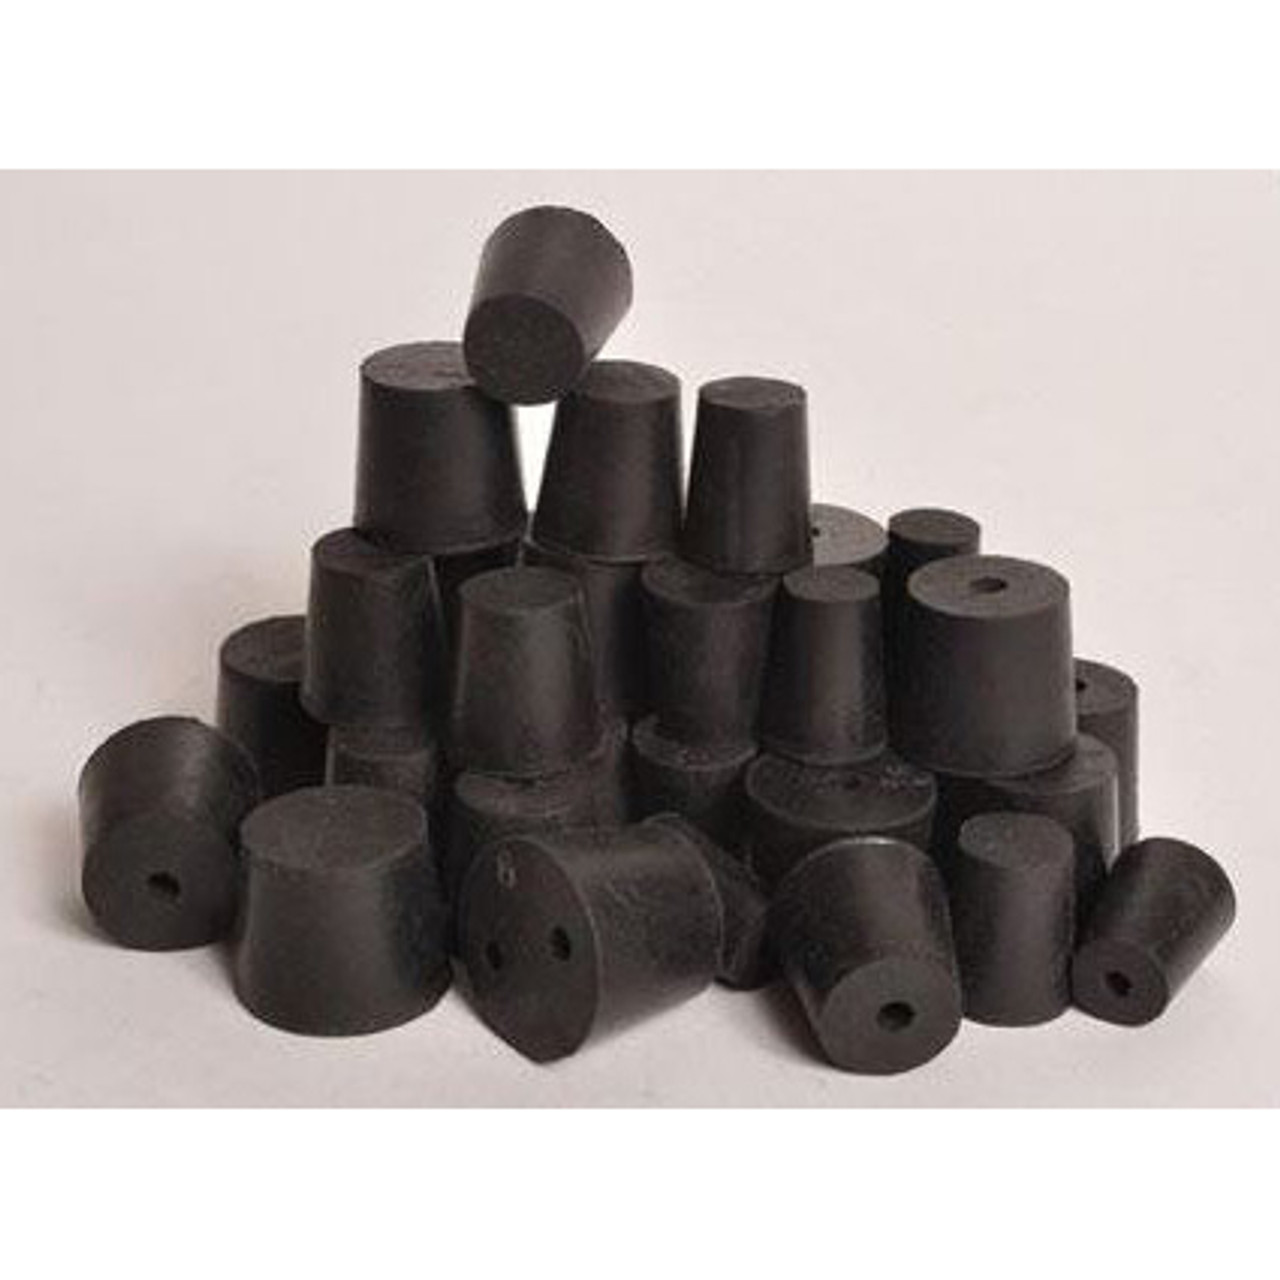 Rubber Stopper, #5, 1-hole